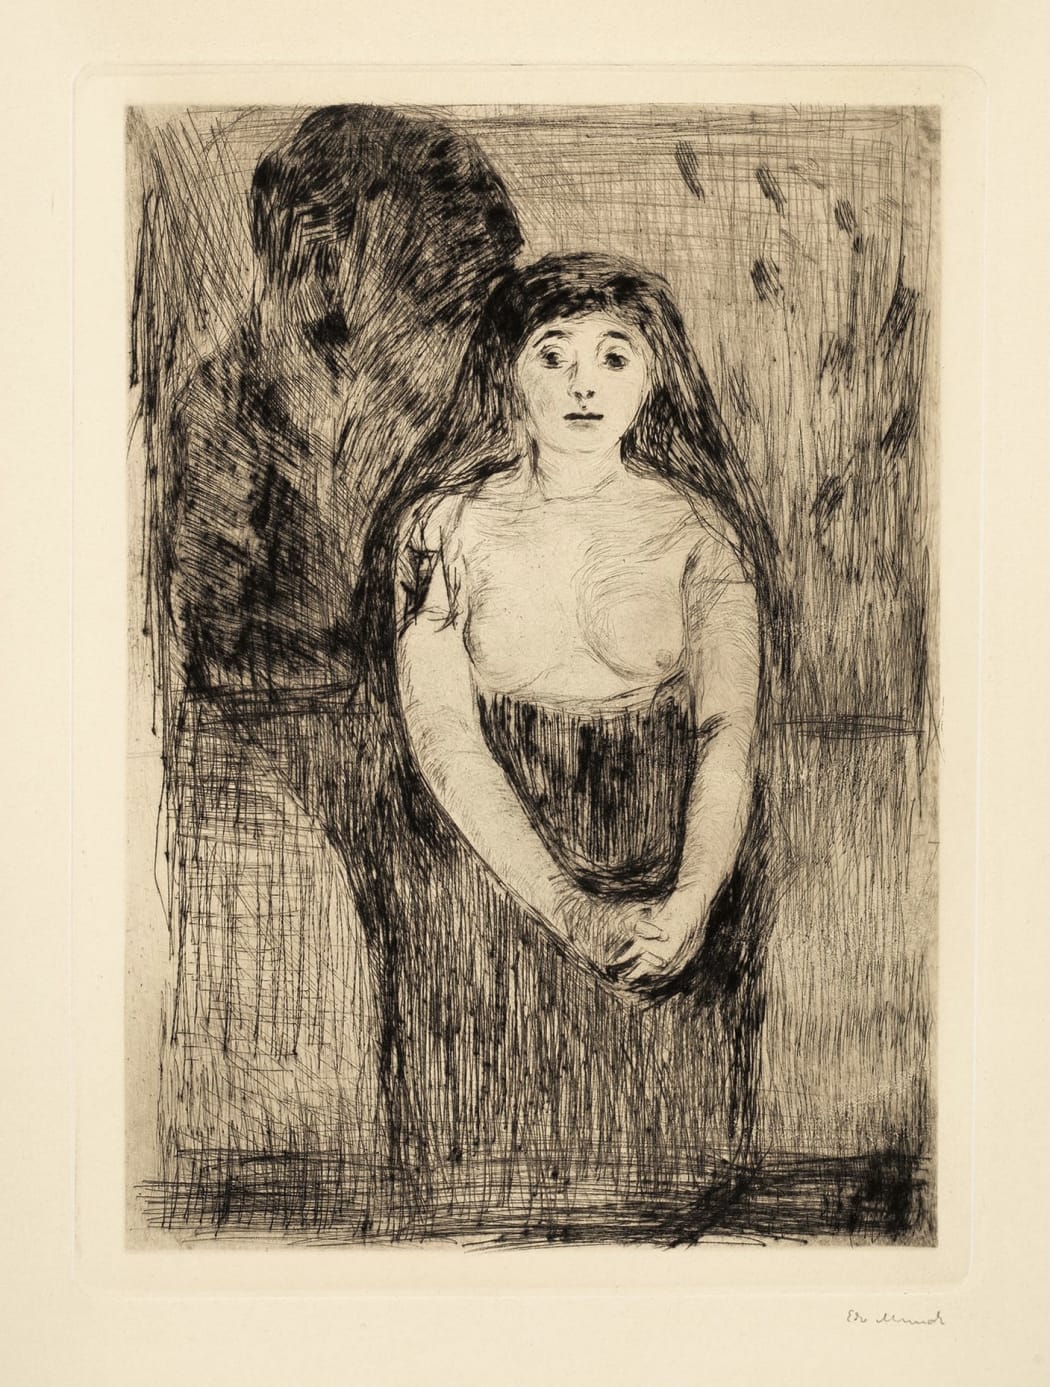 Modellstudie (Study of a Model) (Woll 8) (state II), 1894, drypoint, 11 x 8 1/4 inches